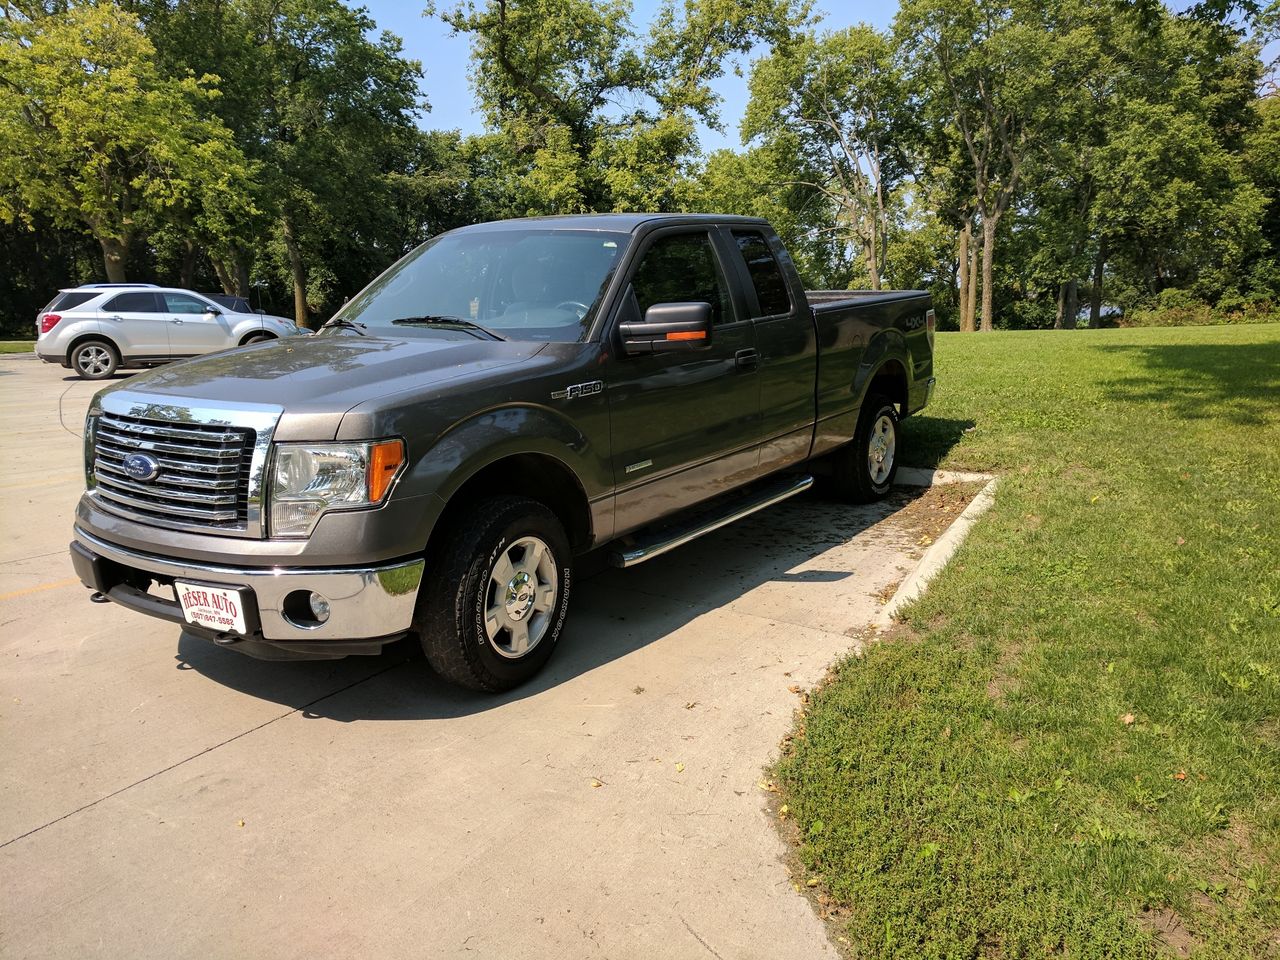 2011 Ford F-150 XLT | Sioux Center, IA, Sterling Grey Metallic (Gray), 4x4